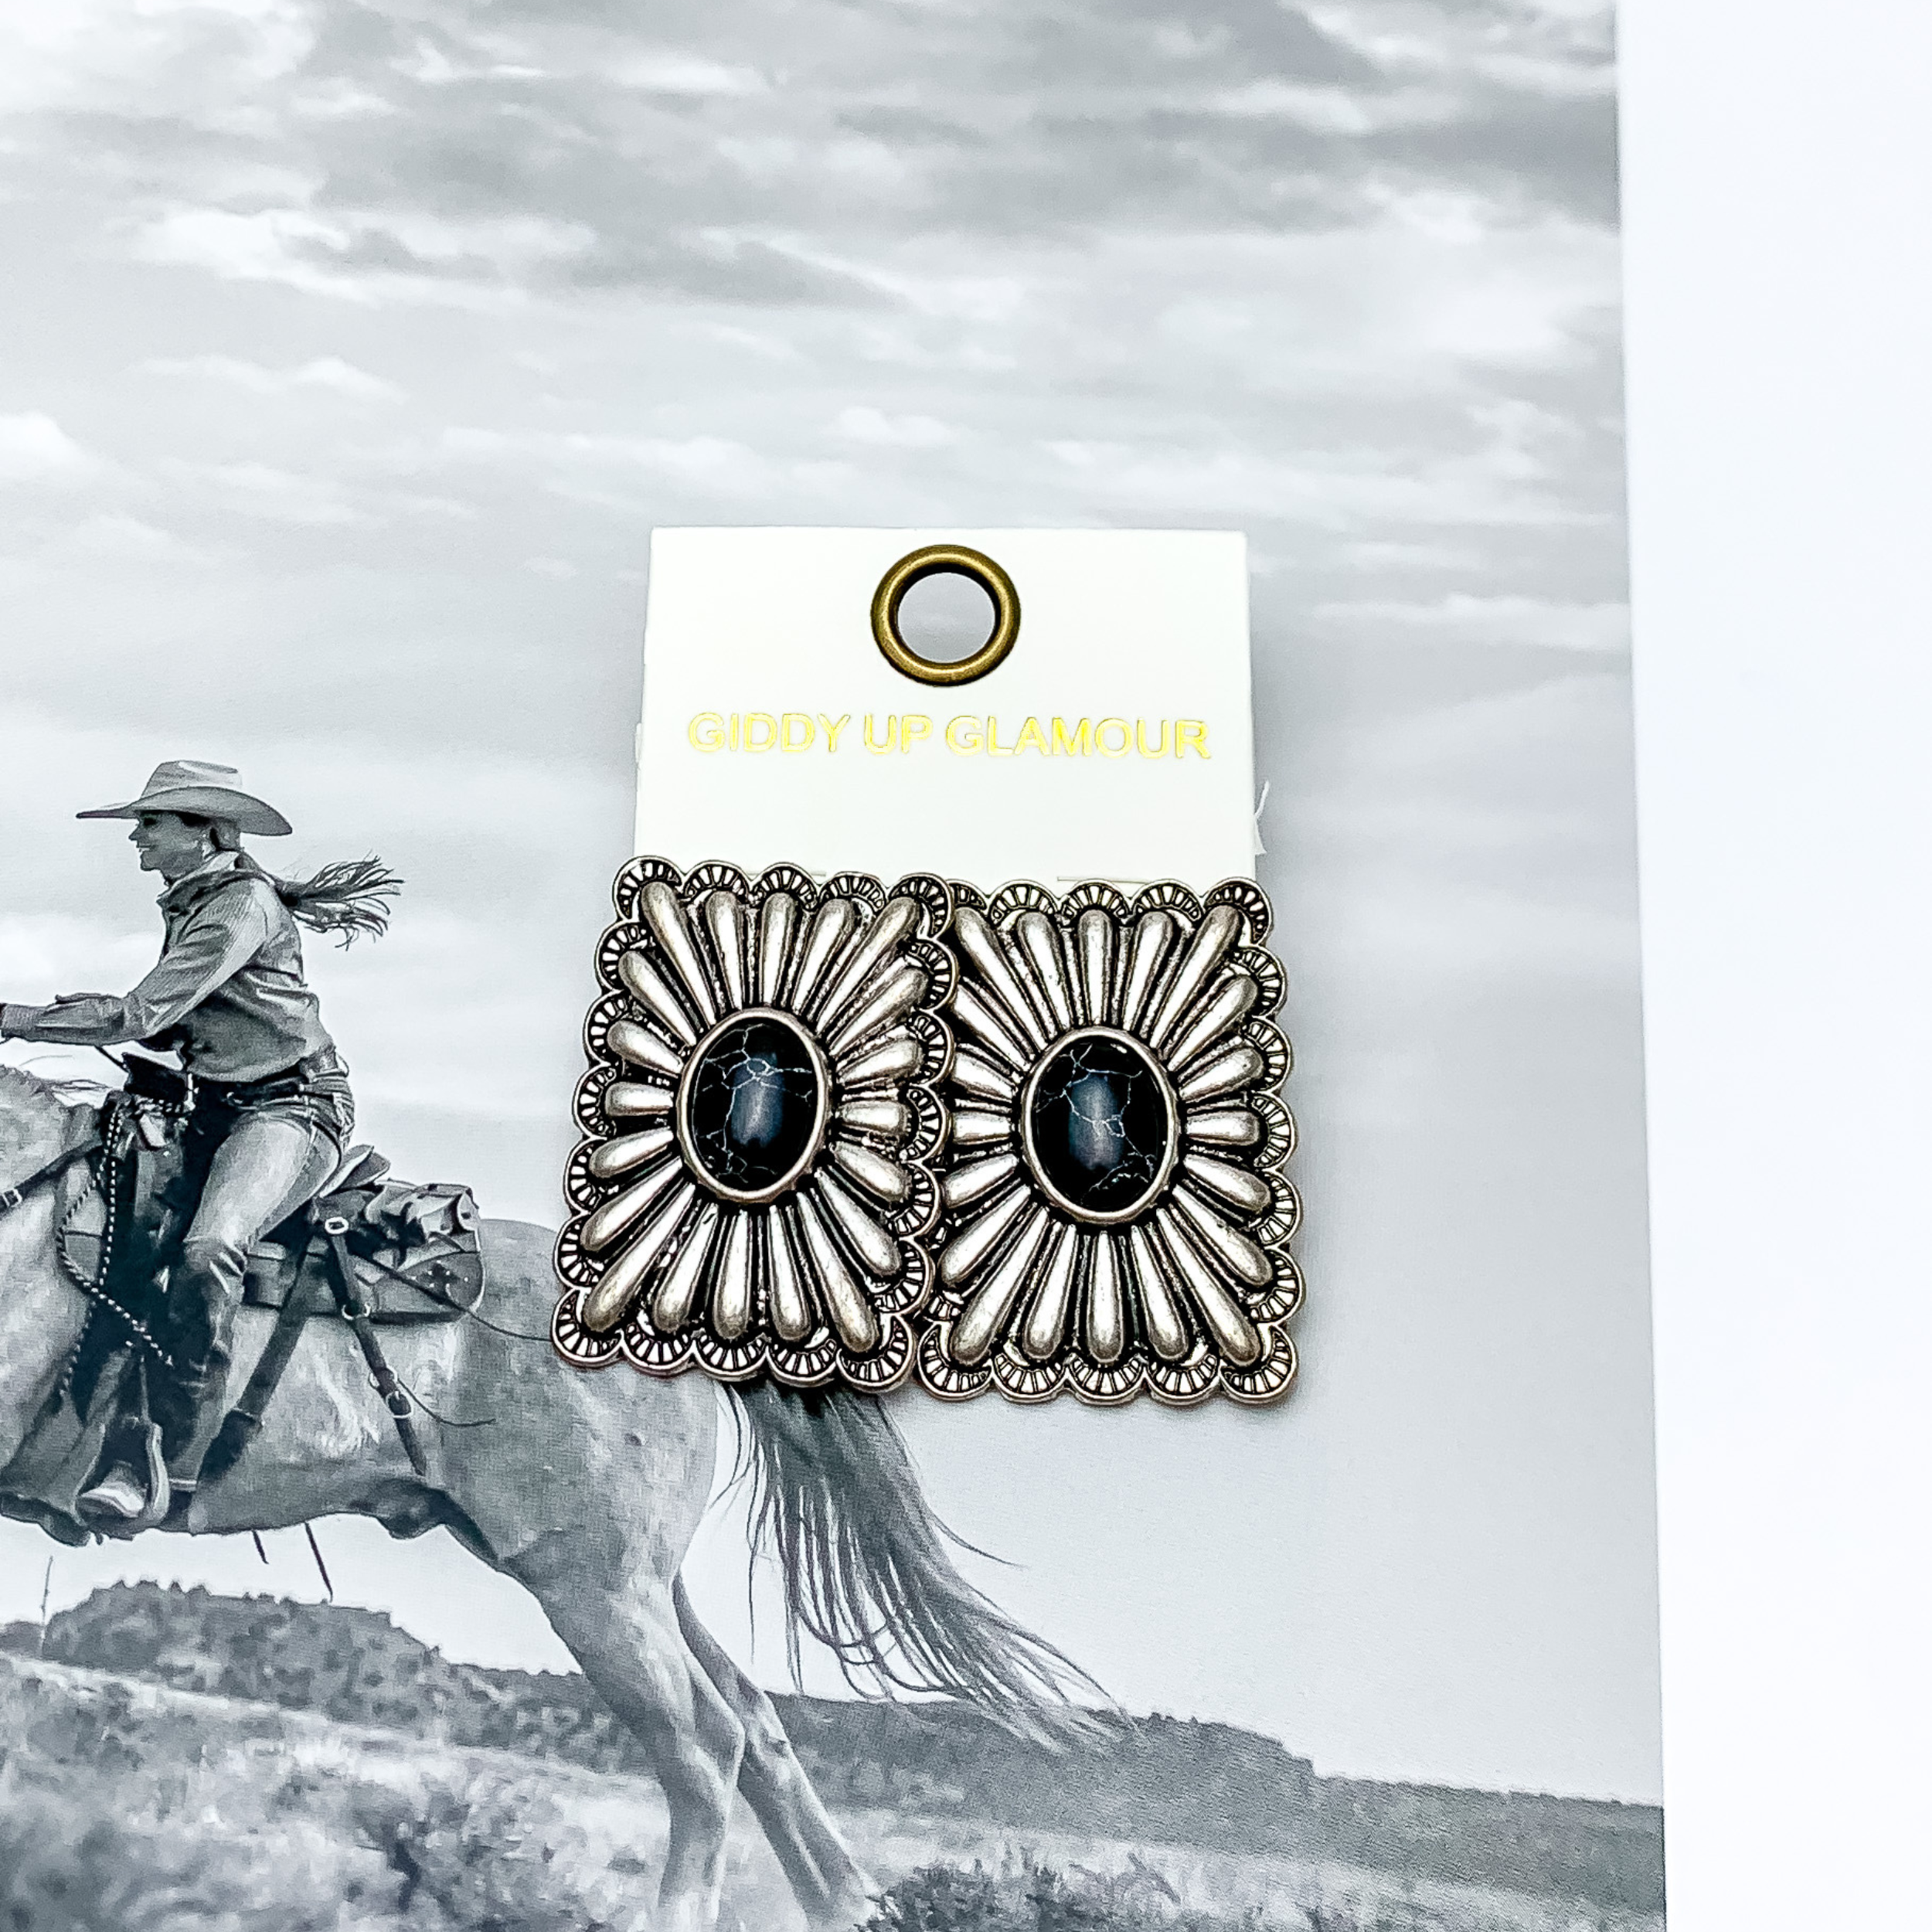 Western Flare Silver Tone Rectangle Earrings With Stone in Black. Pictured on a western scene background.